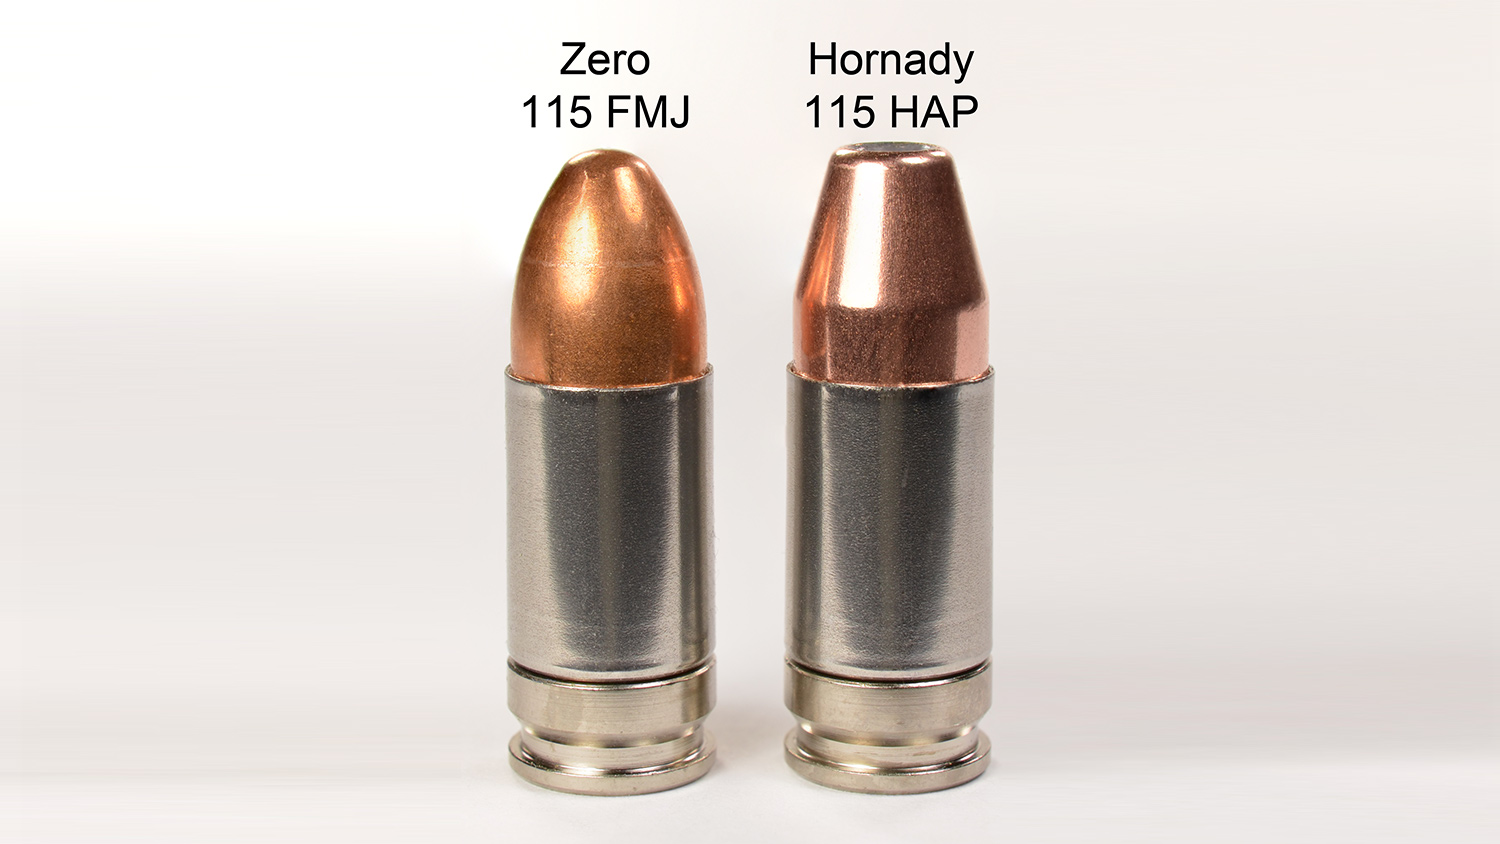 Two 9 Major loads: one with a Zero FMJ bullet and the other with a Hornady HAP bullet.